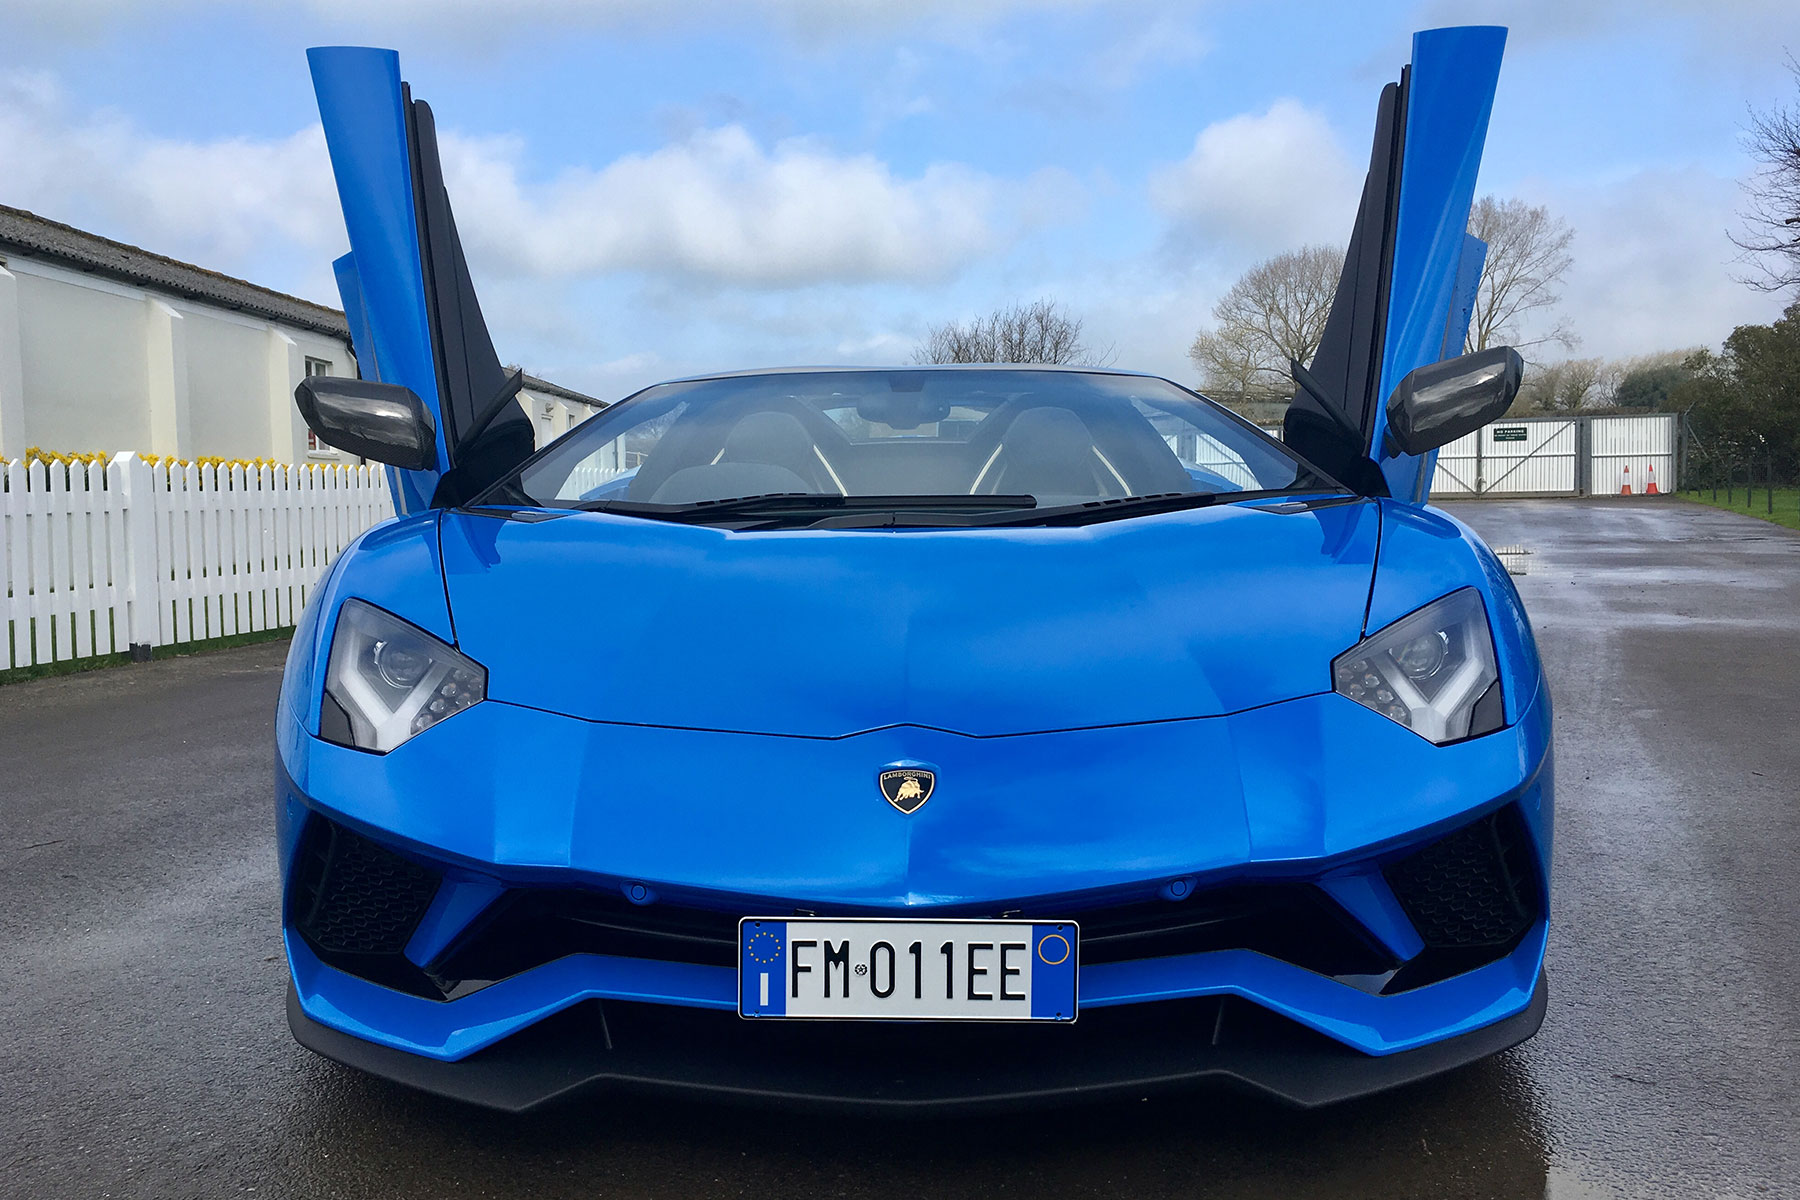 Supercar mega-test: which one is best?